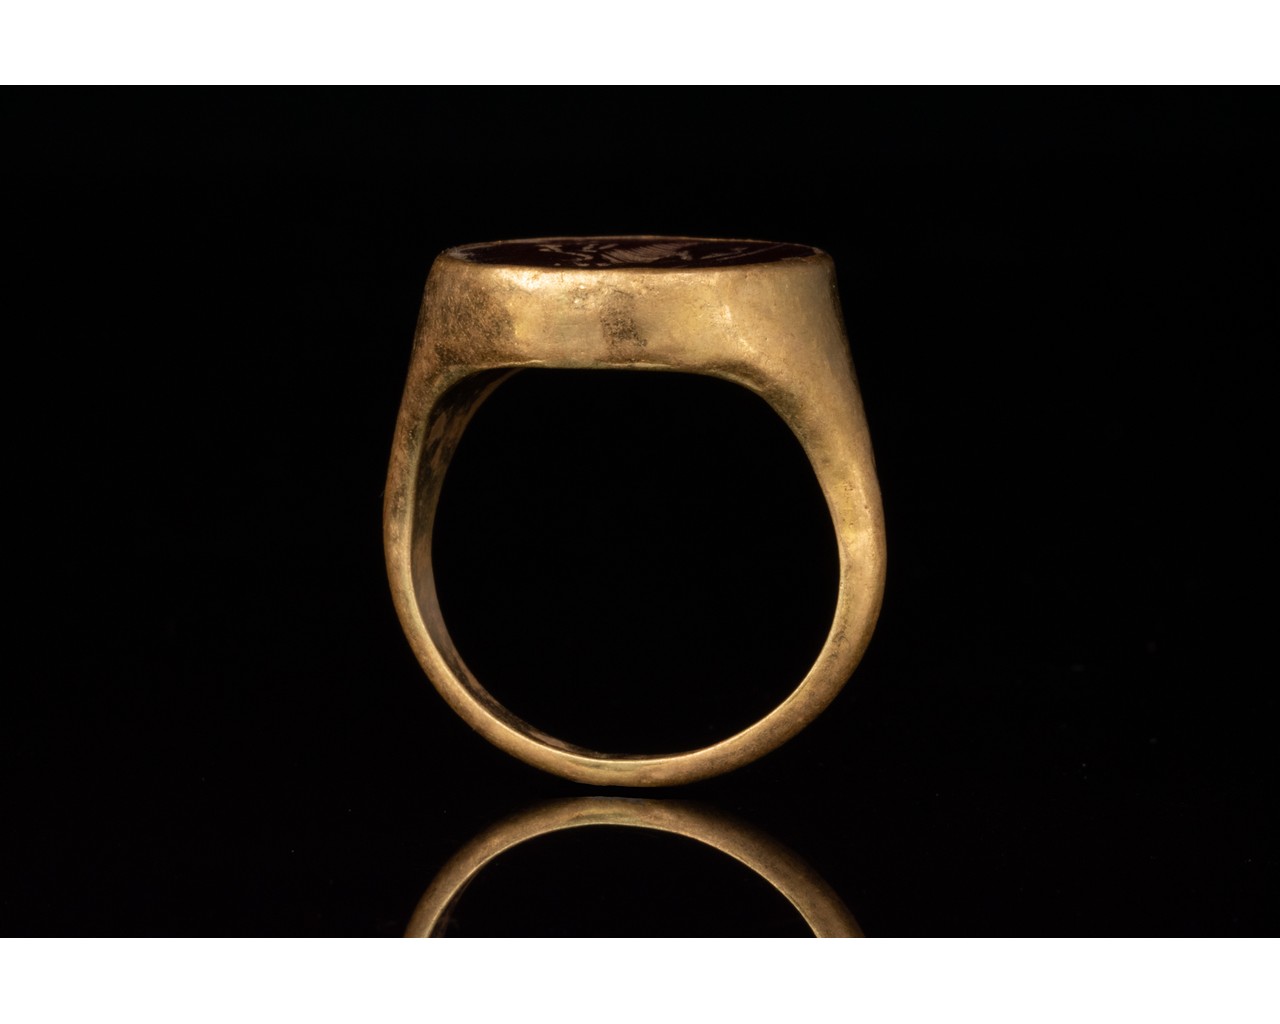 ROMAN GOLD INTAGLIO RING WITH STANDING GODDESS - Image 6 of 6